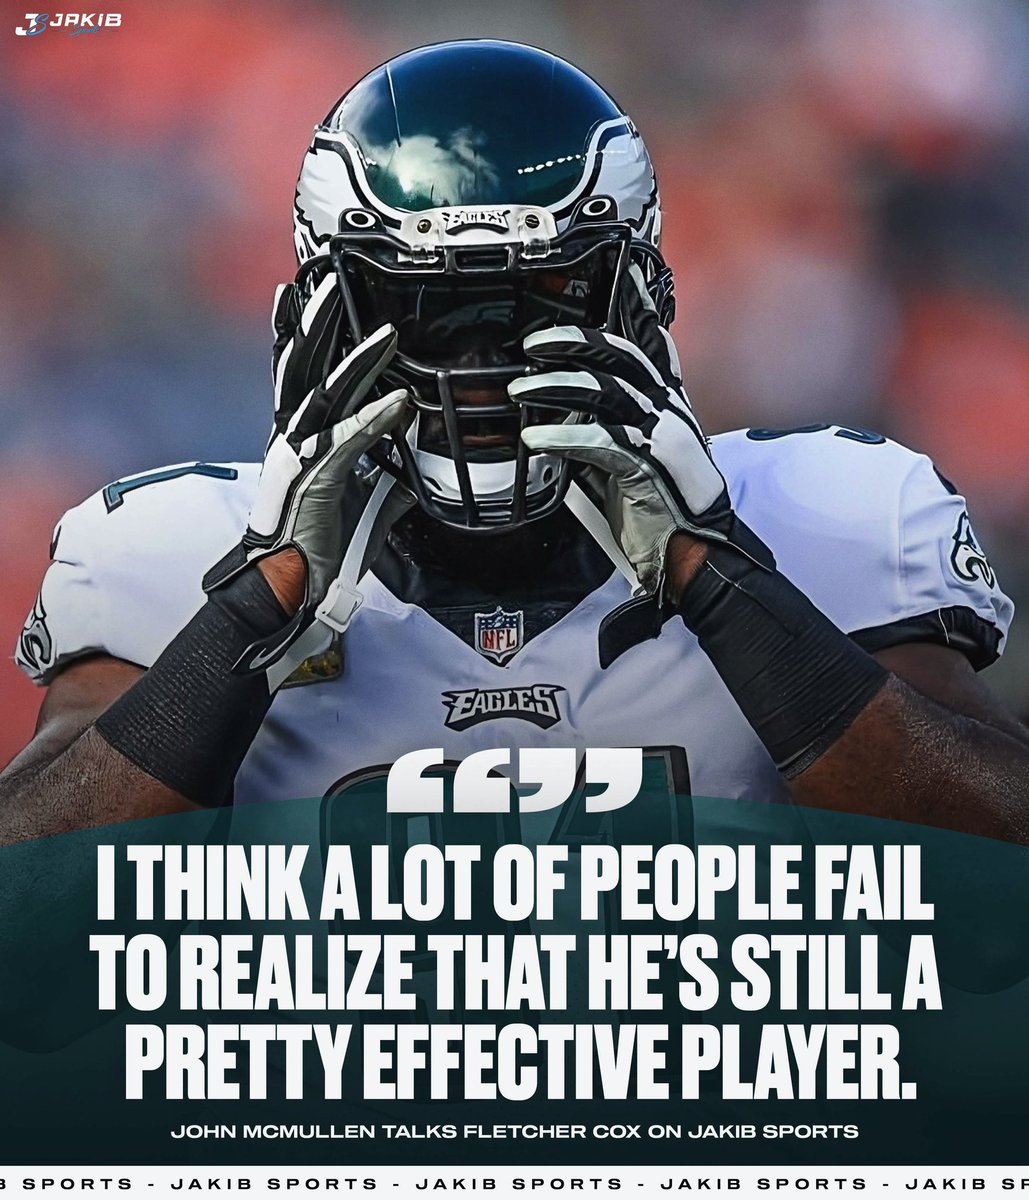 Does Fletcher Cox still have some gas left in the tank? 👀

#FlyEaglesFly